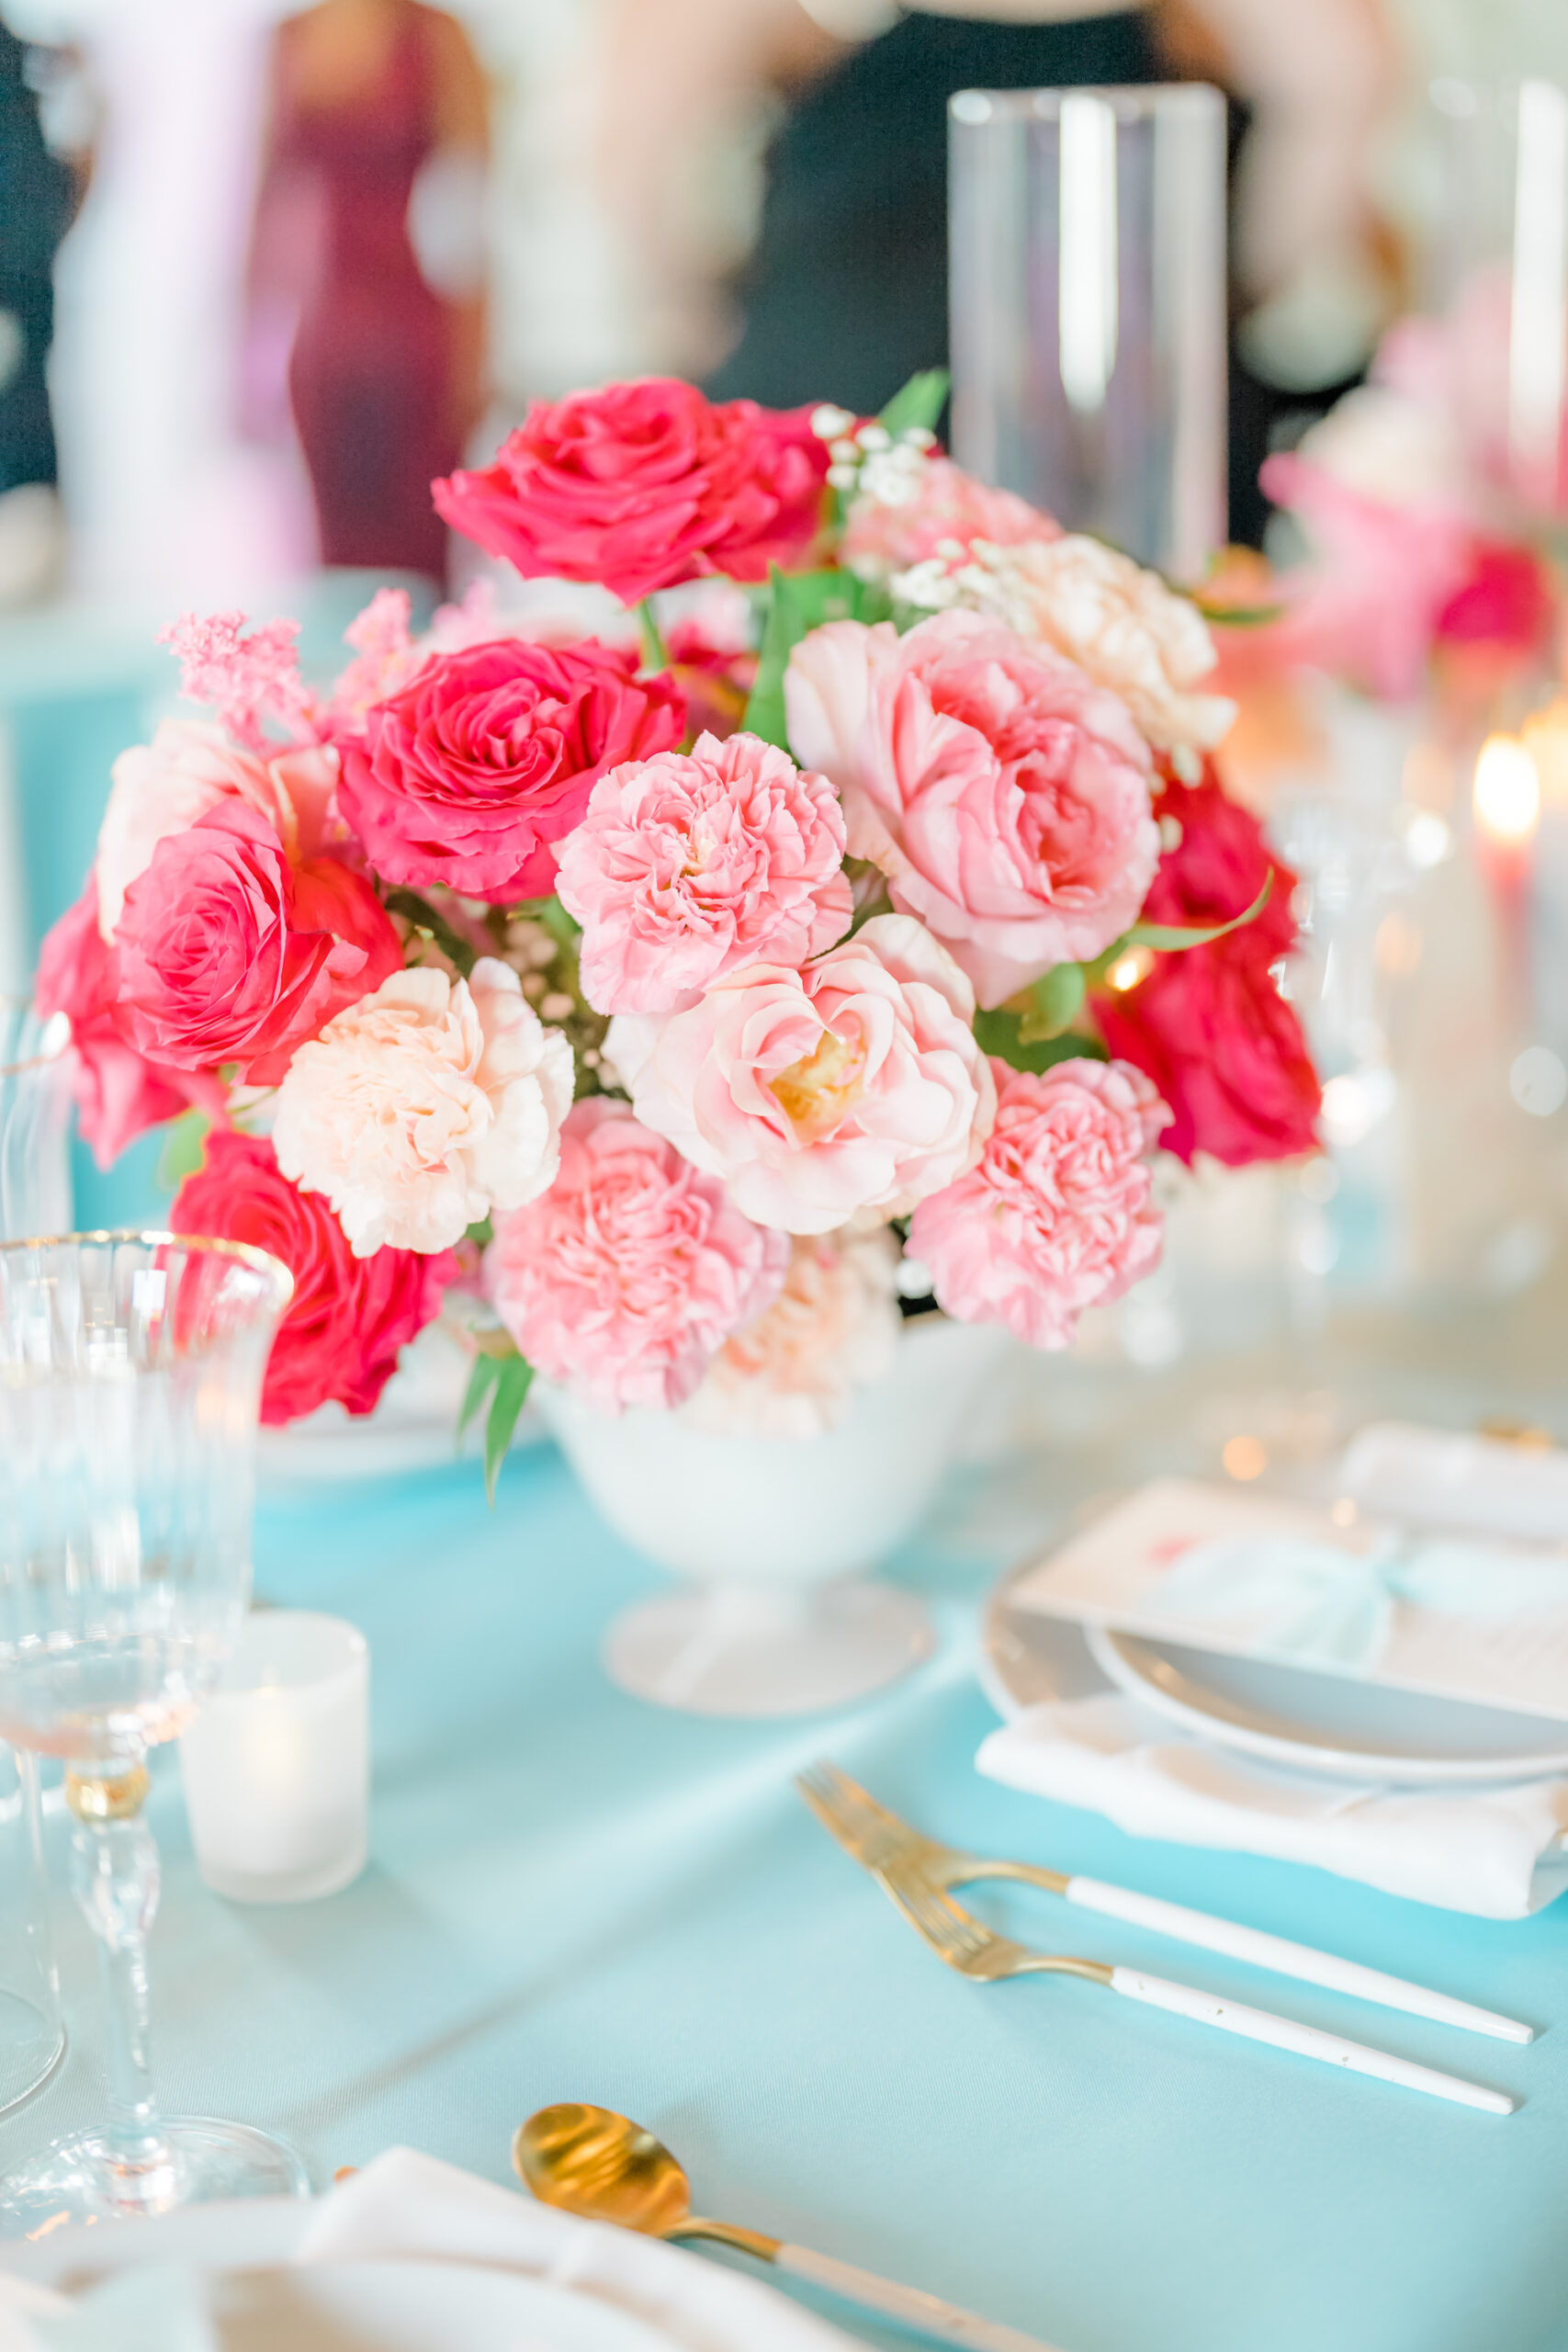 Summer Inspired Wedding Decor, Turquoise Table Linen, White and Gold Flatware, Low Pink and Fuchsia Roses Floral Centerpieces, Pink Candlesticks | St. Pete Beach Wedding Rentals Gabro Event Services